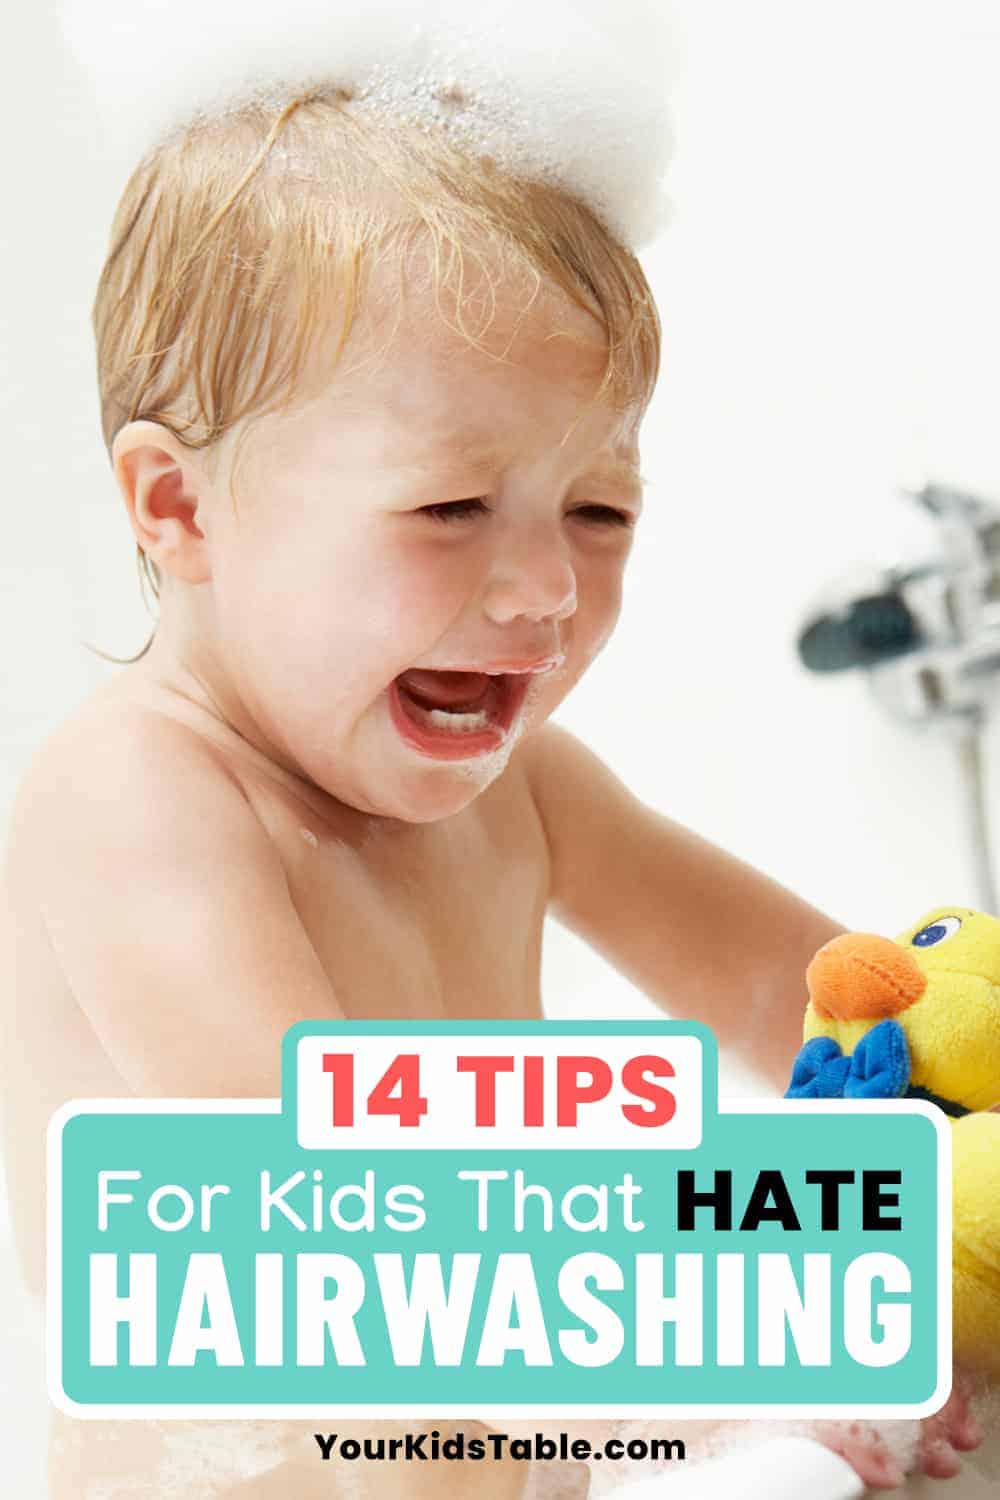 Do you dread washing your kid's hair because they hate it so much and throw a total fit at any attempt to do so? Understand why your child hates hair washing and learn these simple strategies to help!